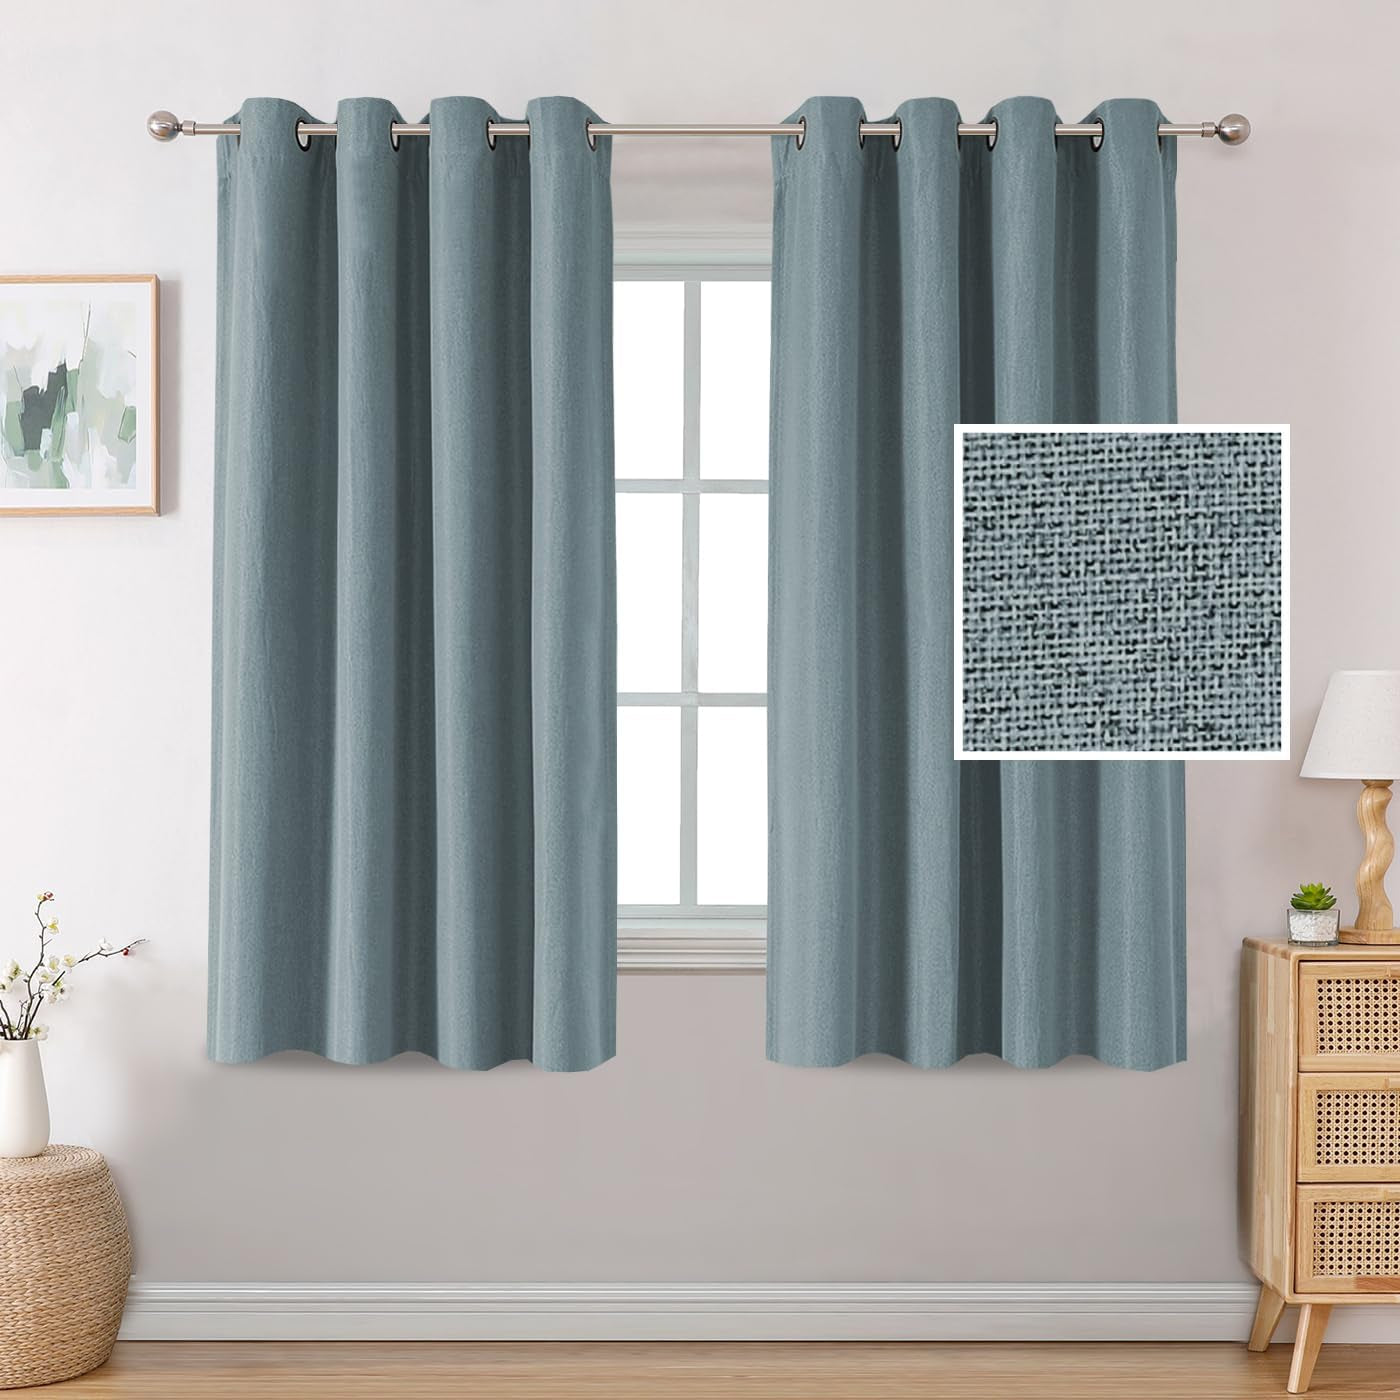 H.VERSAILTEX Linen Blackout Curtains 84 Inches Long Thermal Insulated Room Darkening Linen Curtains for Bedroom Textured Burlap Grommet Window Curtains for Living Room, Bluestone and Taupe, 2 Panels  H.VERSAILTEX Stone Blue 52"W X 54"L 